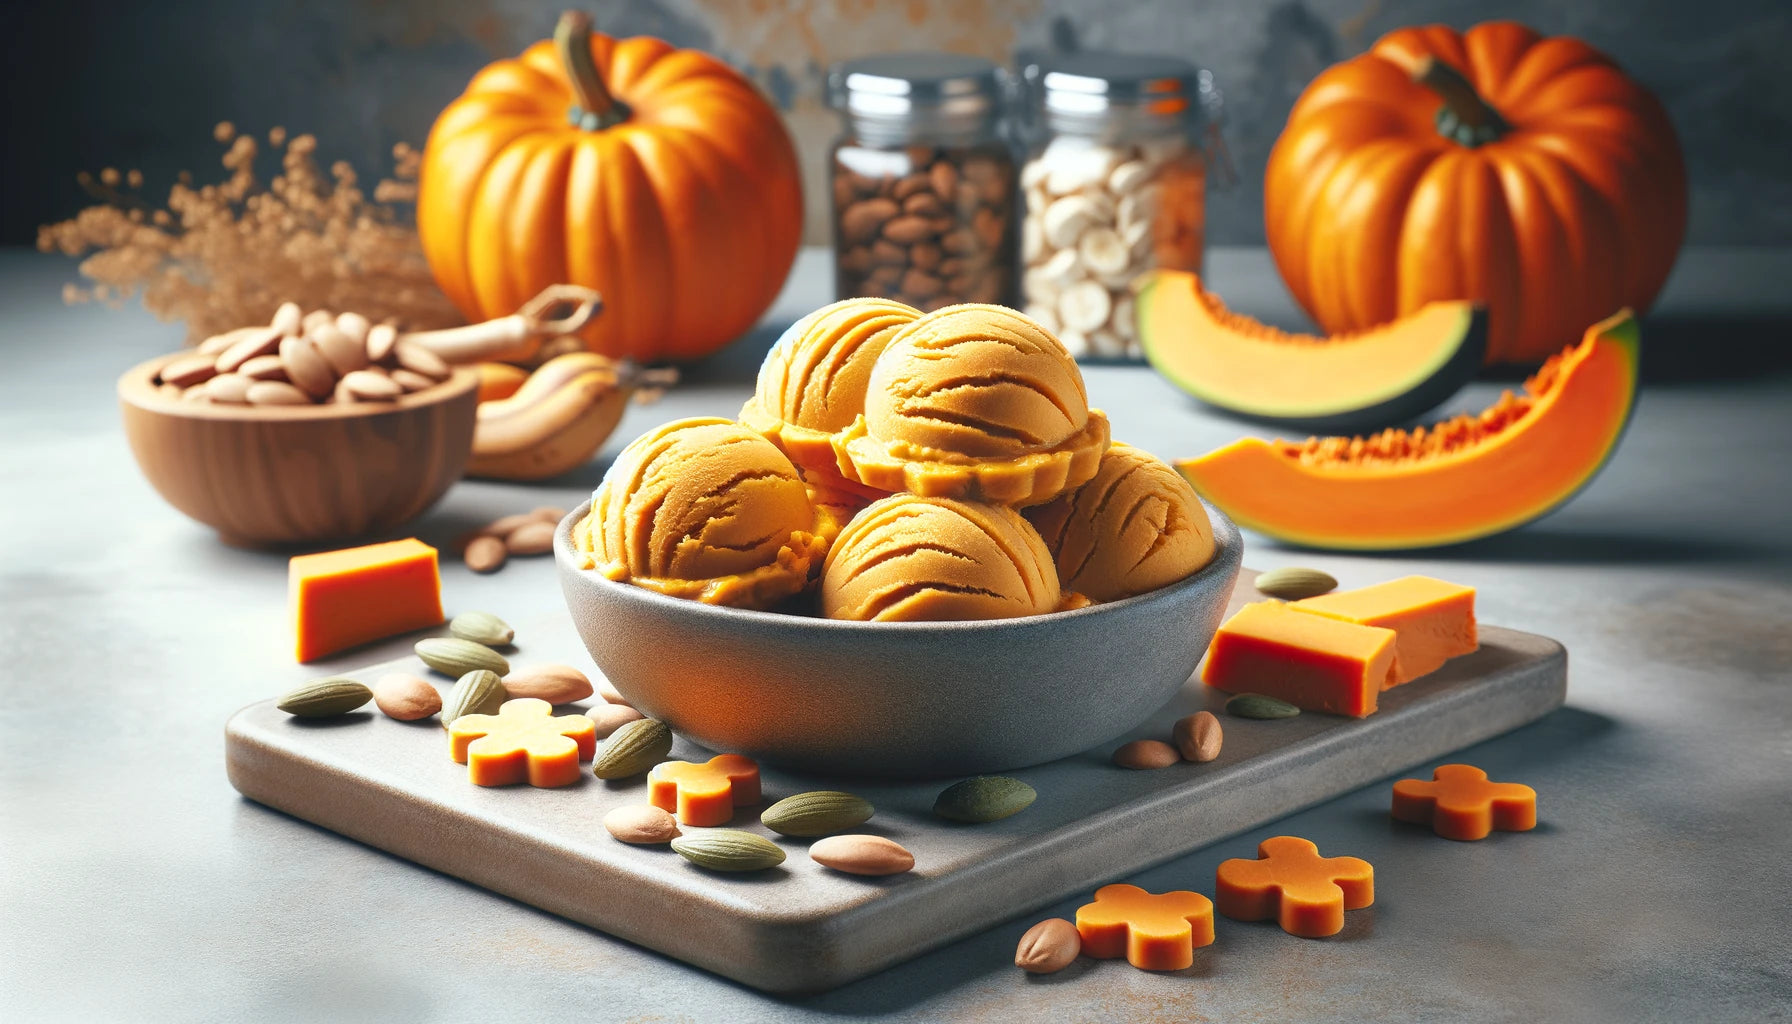 Dairy-Free Pumpkin Dog Ice Cream showcasing a refreshing and healthy treat for dogs.